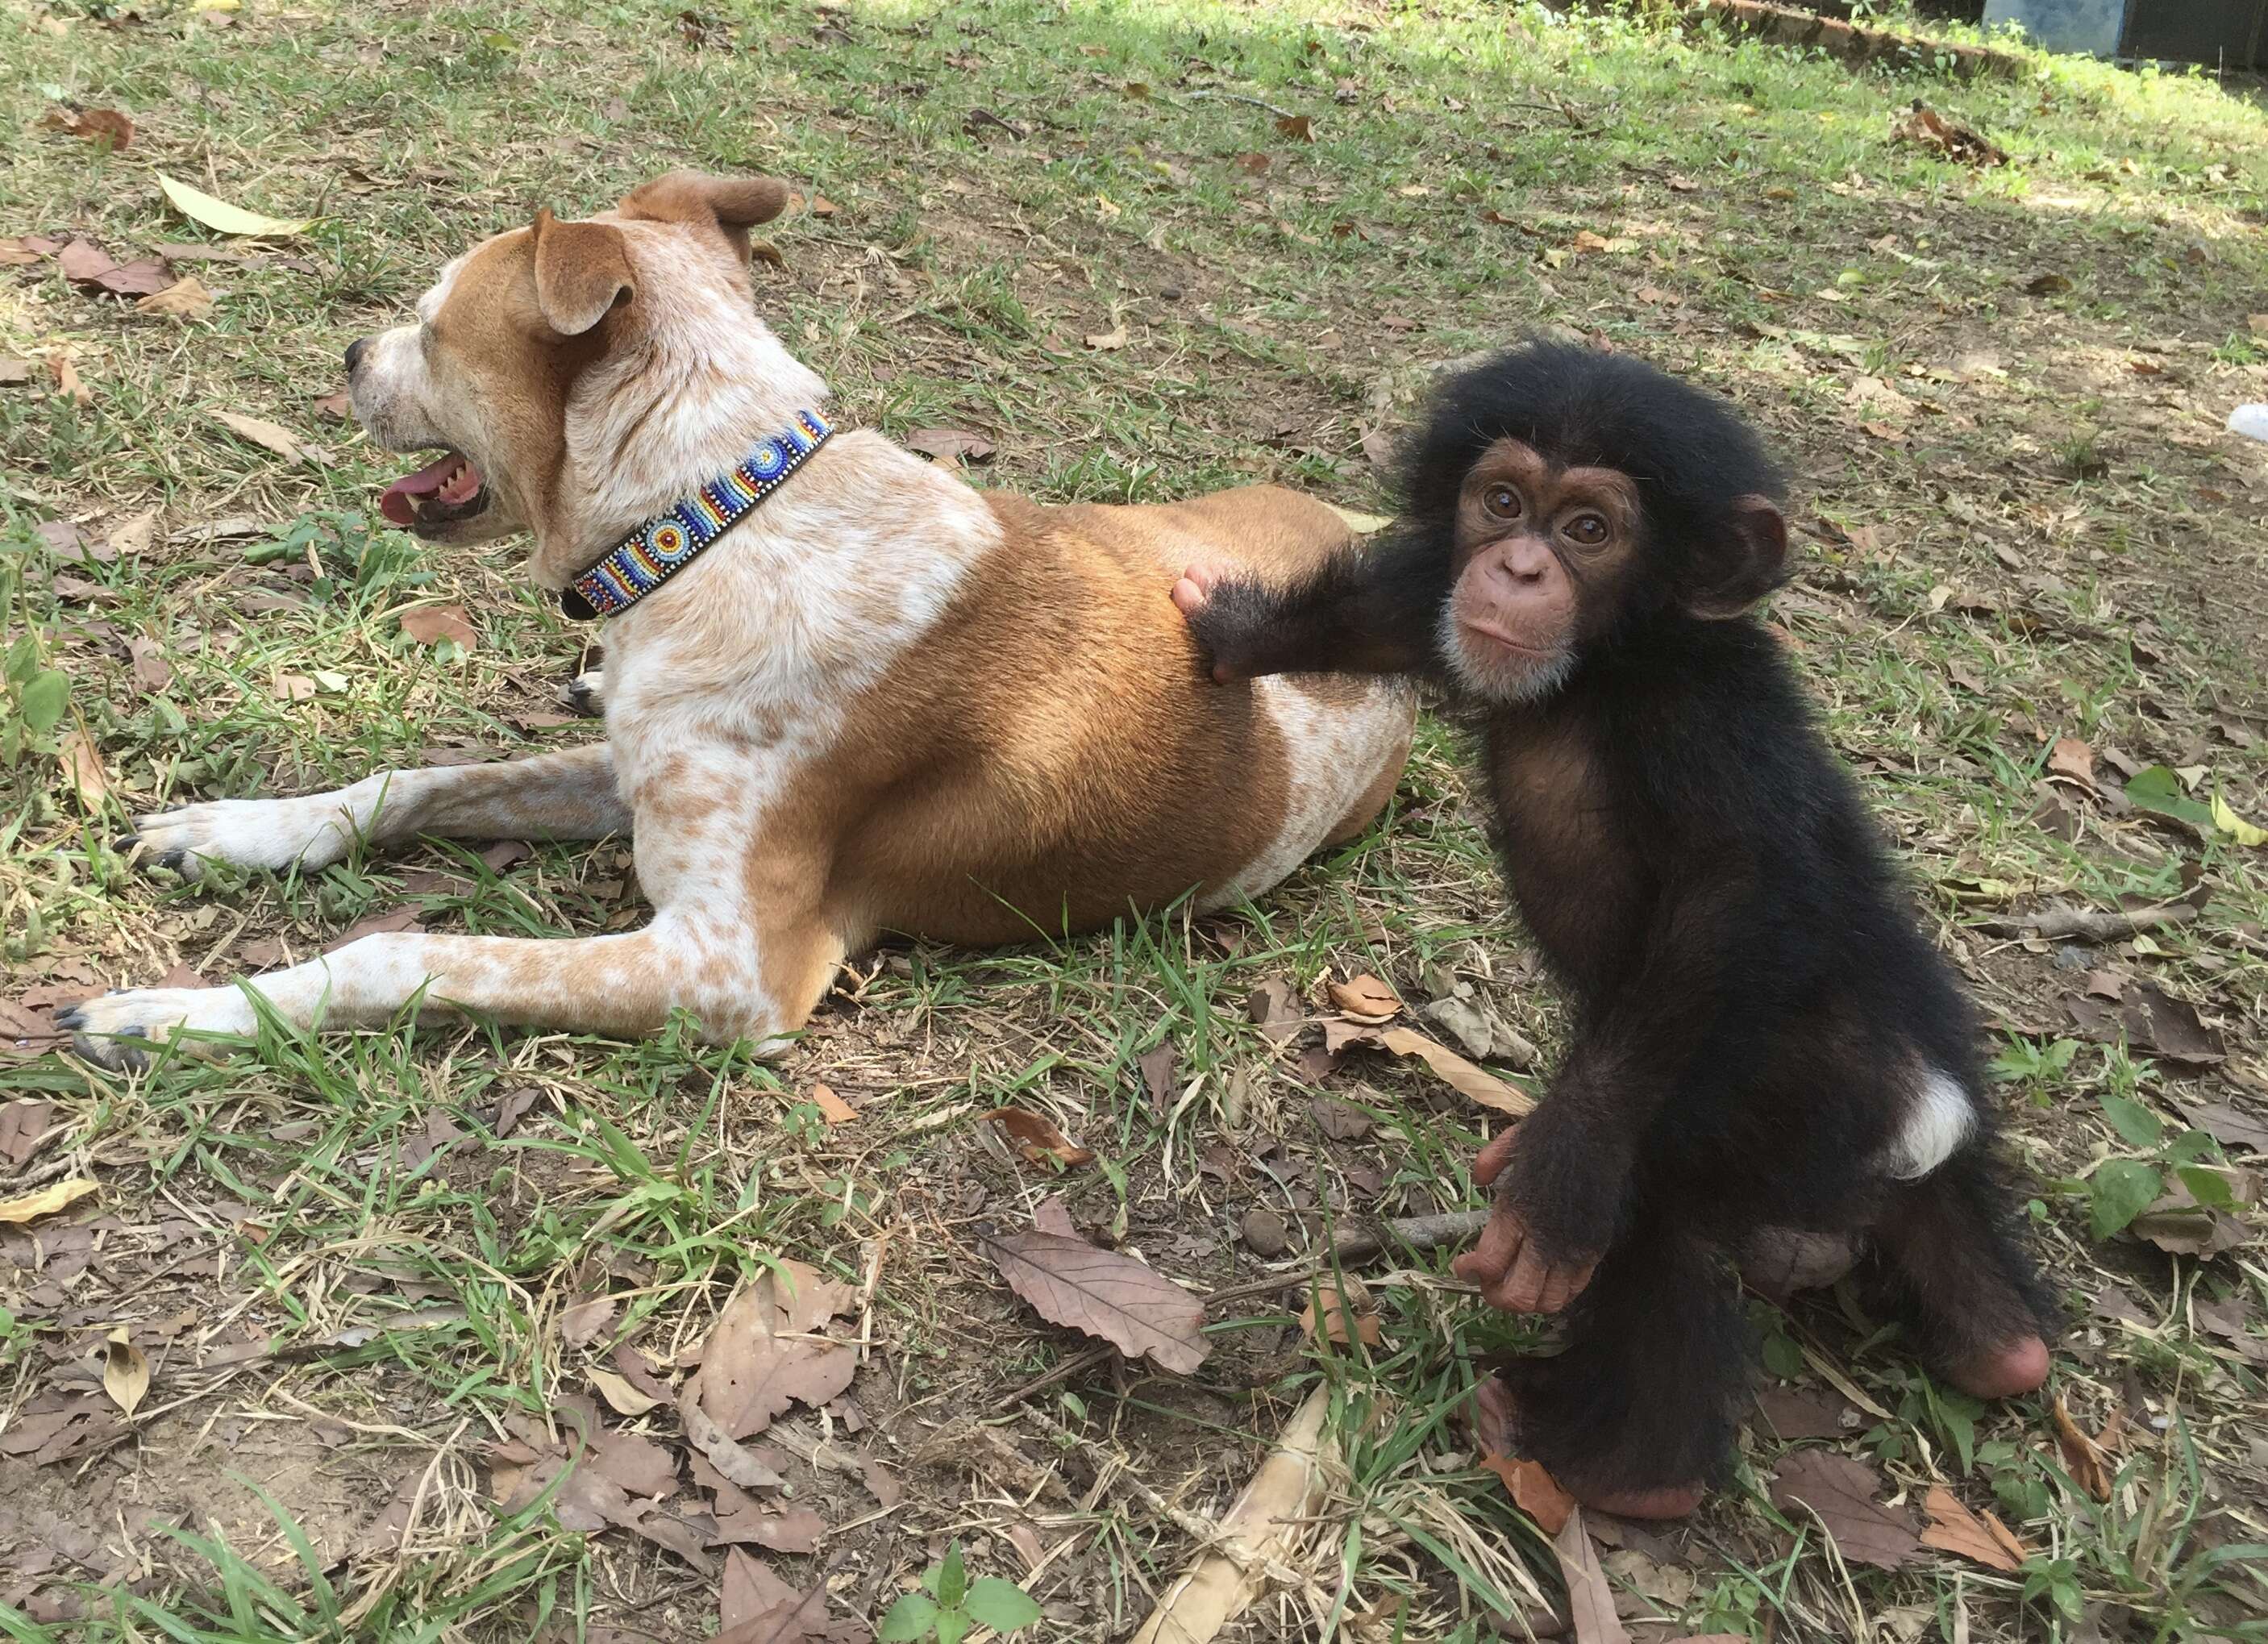 Rescued chimp and rescued dog